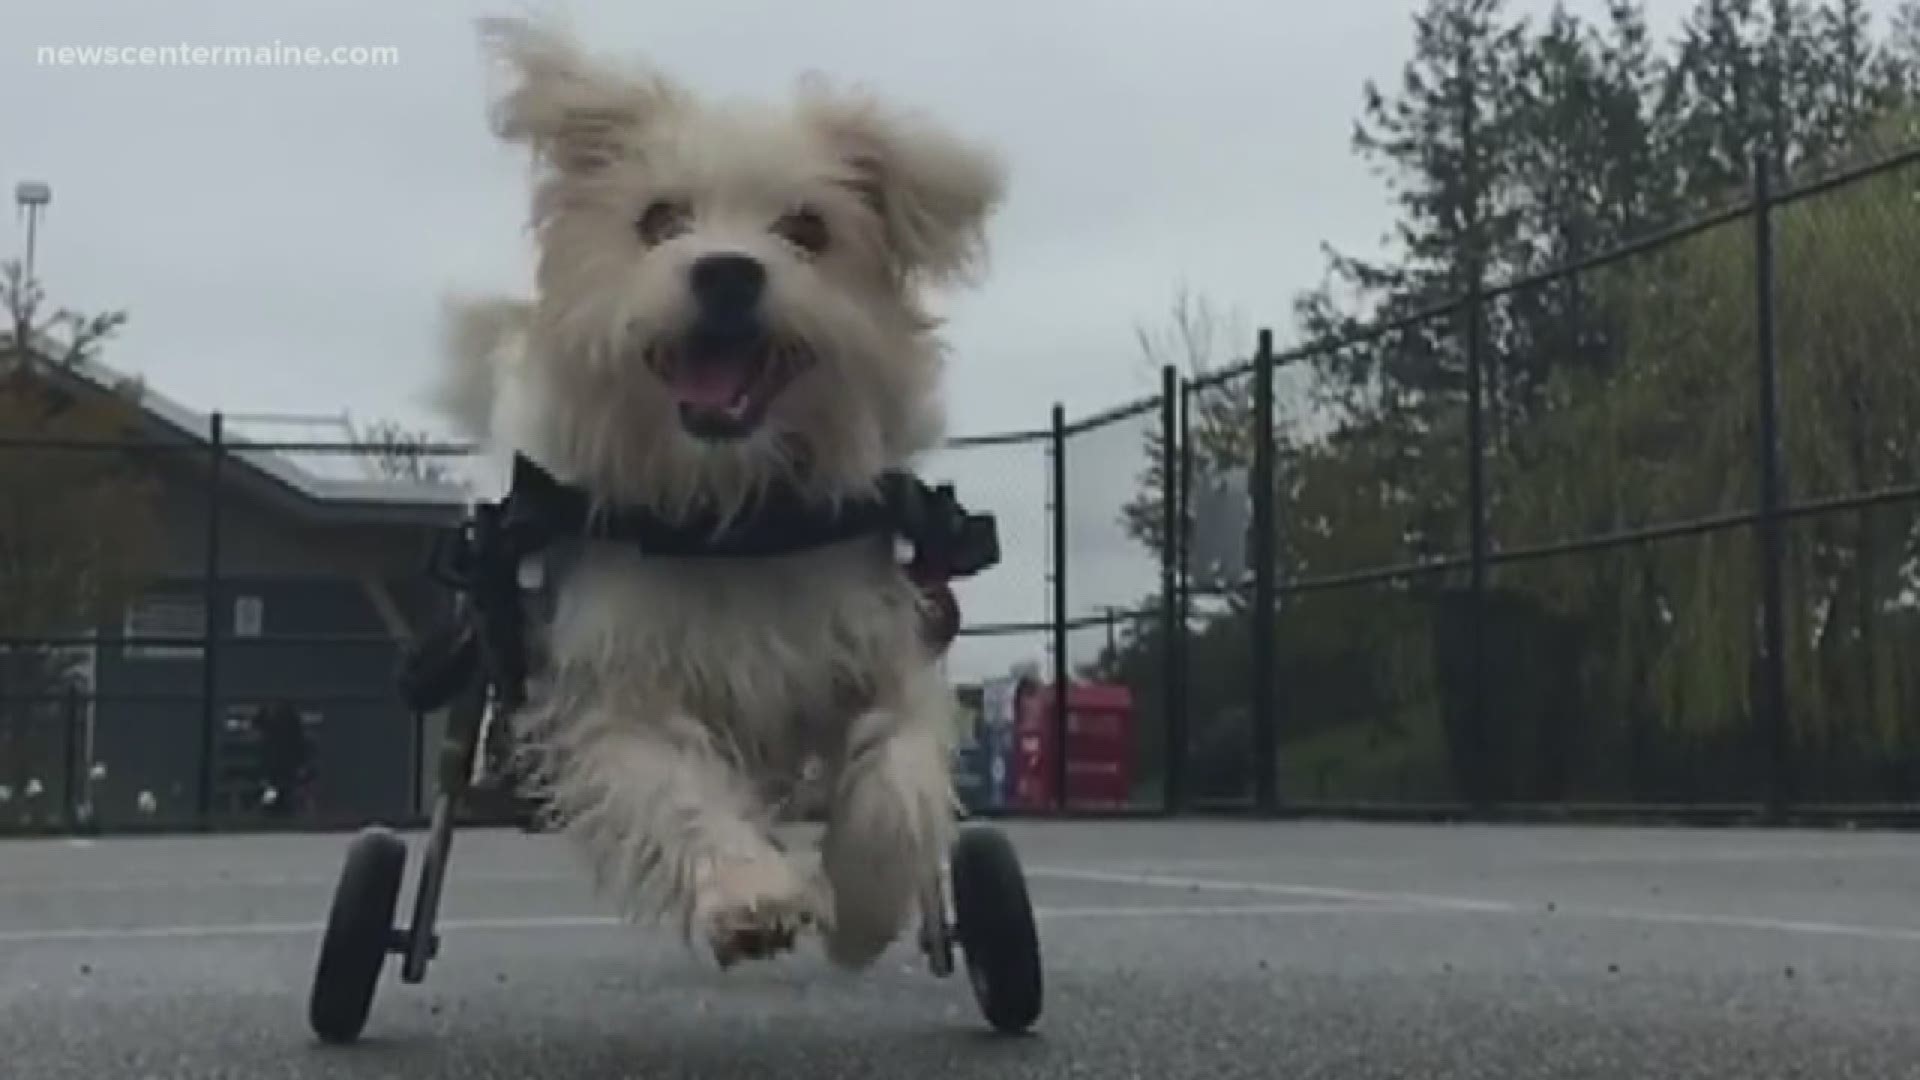 The New Hampshire company Walkin' Pets makes it possible for handicapped dogs and pets to walk and run again. Marc Robinson creates pet wheelchairs and so much more.